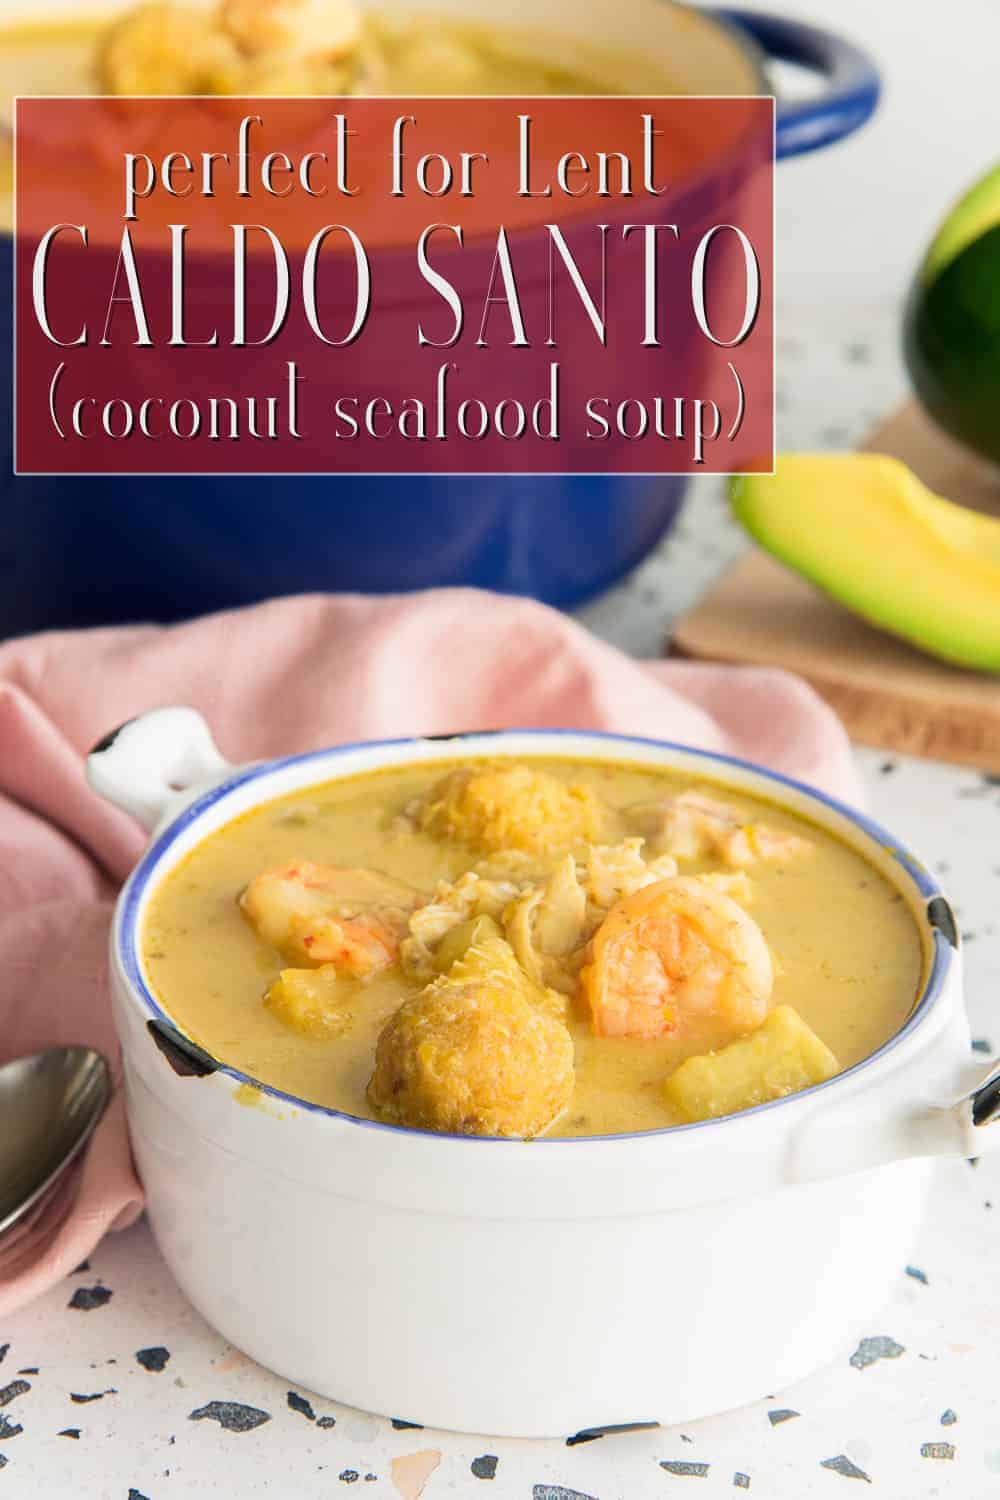 Caldo Santo (Coconut Seafood Soup) is a comforting dish served commonly during the Lenten season in many Latin American countries. Use a variety of seafood or just one for this recipe. Add sliced bread and ripe avocado for a more filling meal. #caldosanto #fishstew #fishchowder #chowderrecipe #seafoodchowder #lentenrecipe #recipesforlent #PuertoRicanrecipe #PuertoRicanstew #codfish #bacalao #shrimp #redsnapper #viandas  via @ediblesense